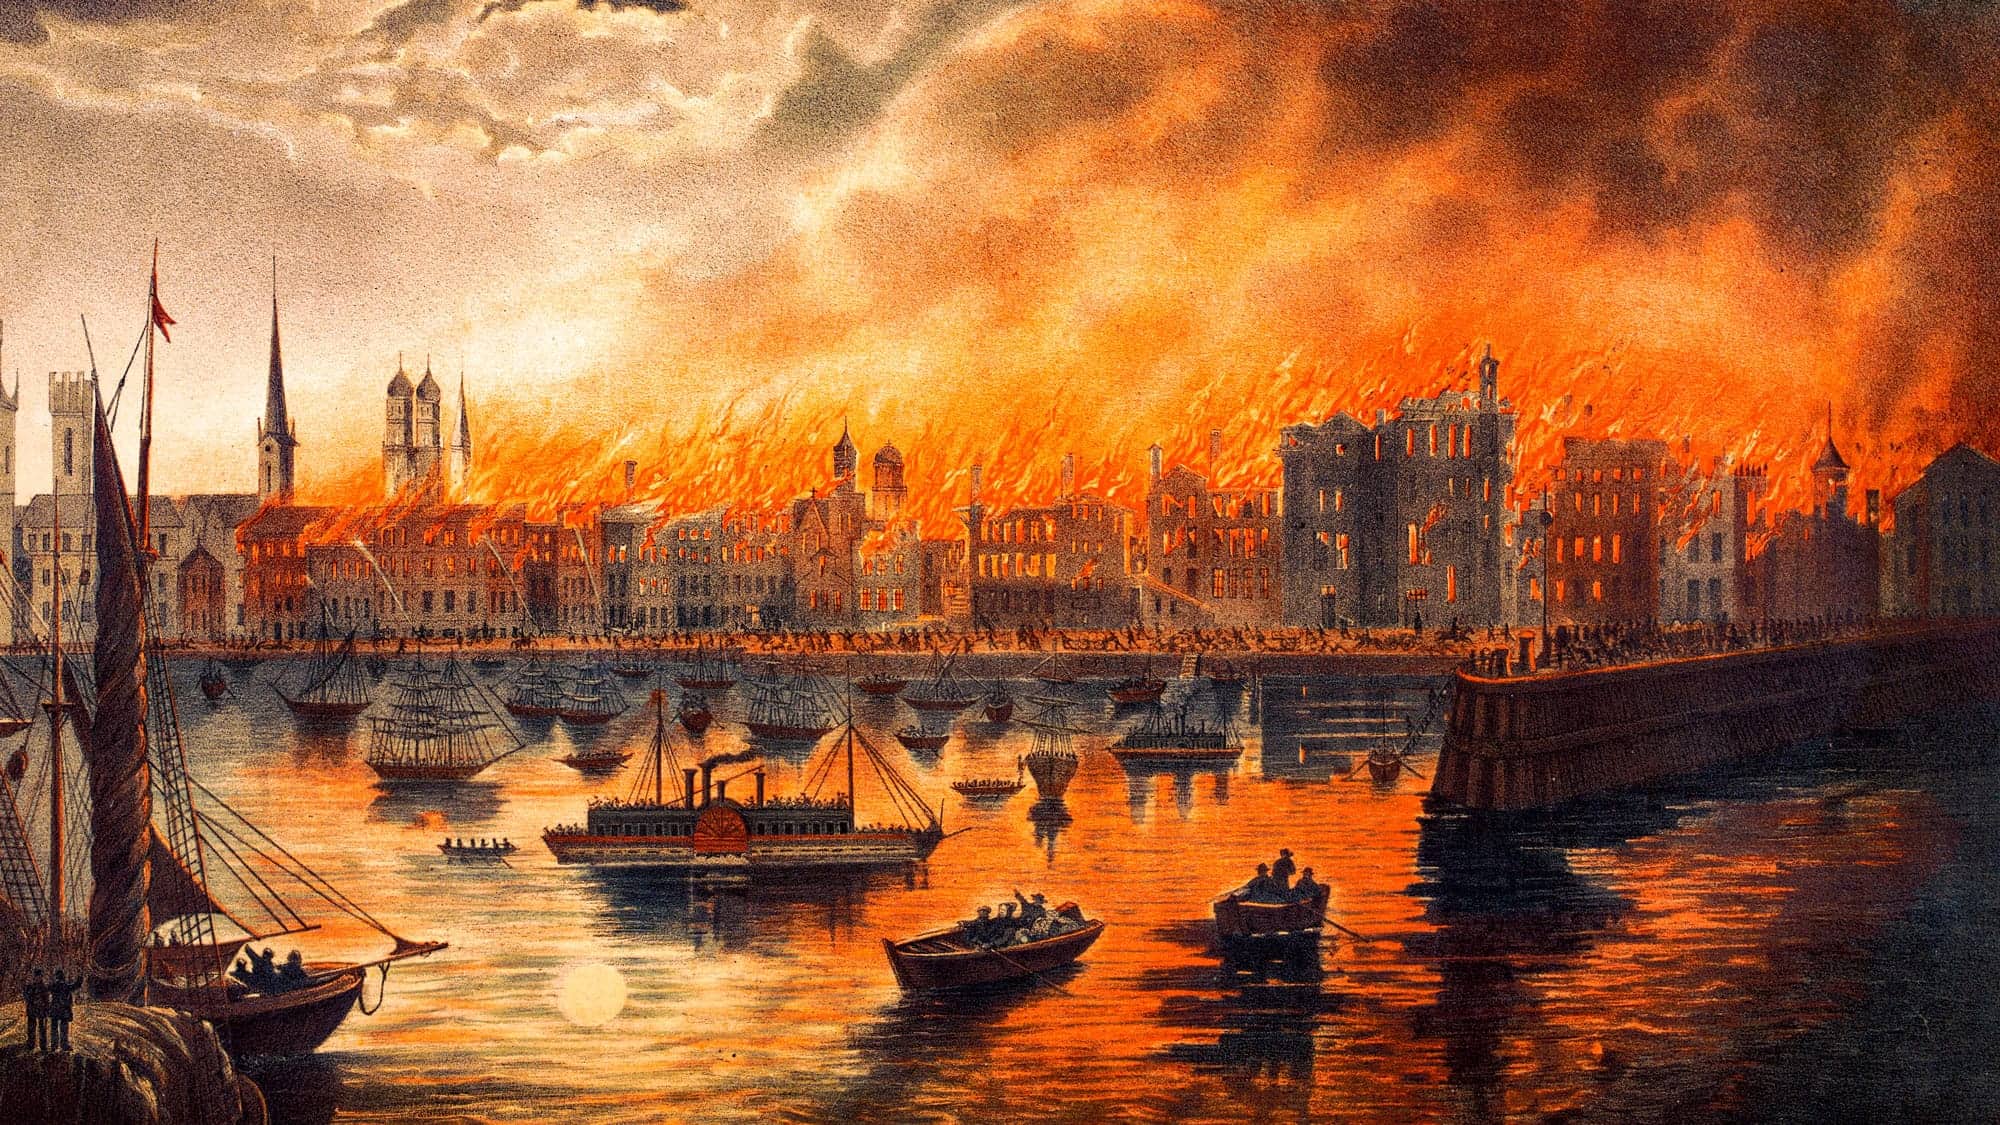 1871-The Great Chicago Fire is finally extinguished